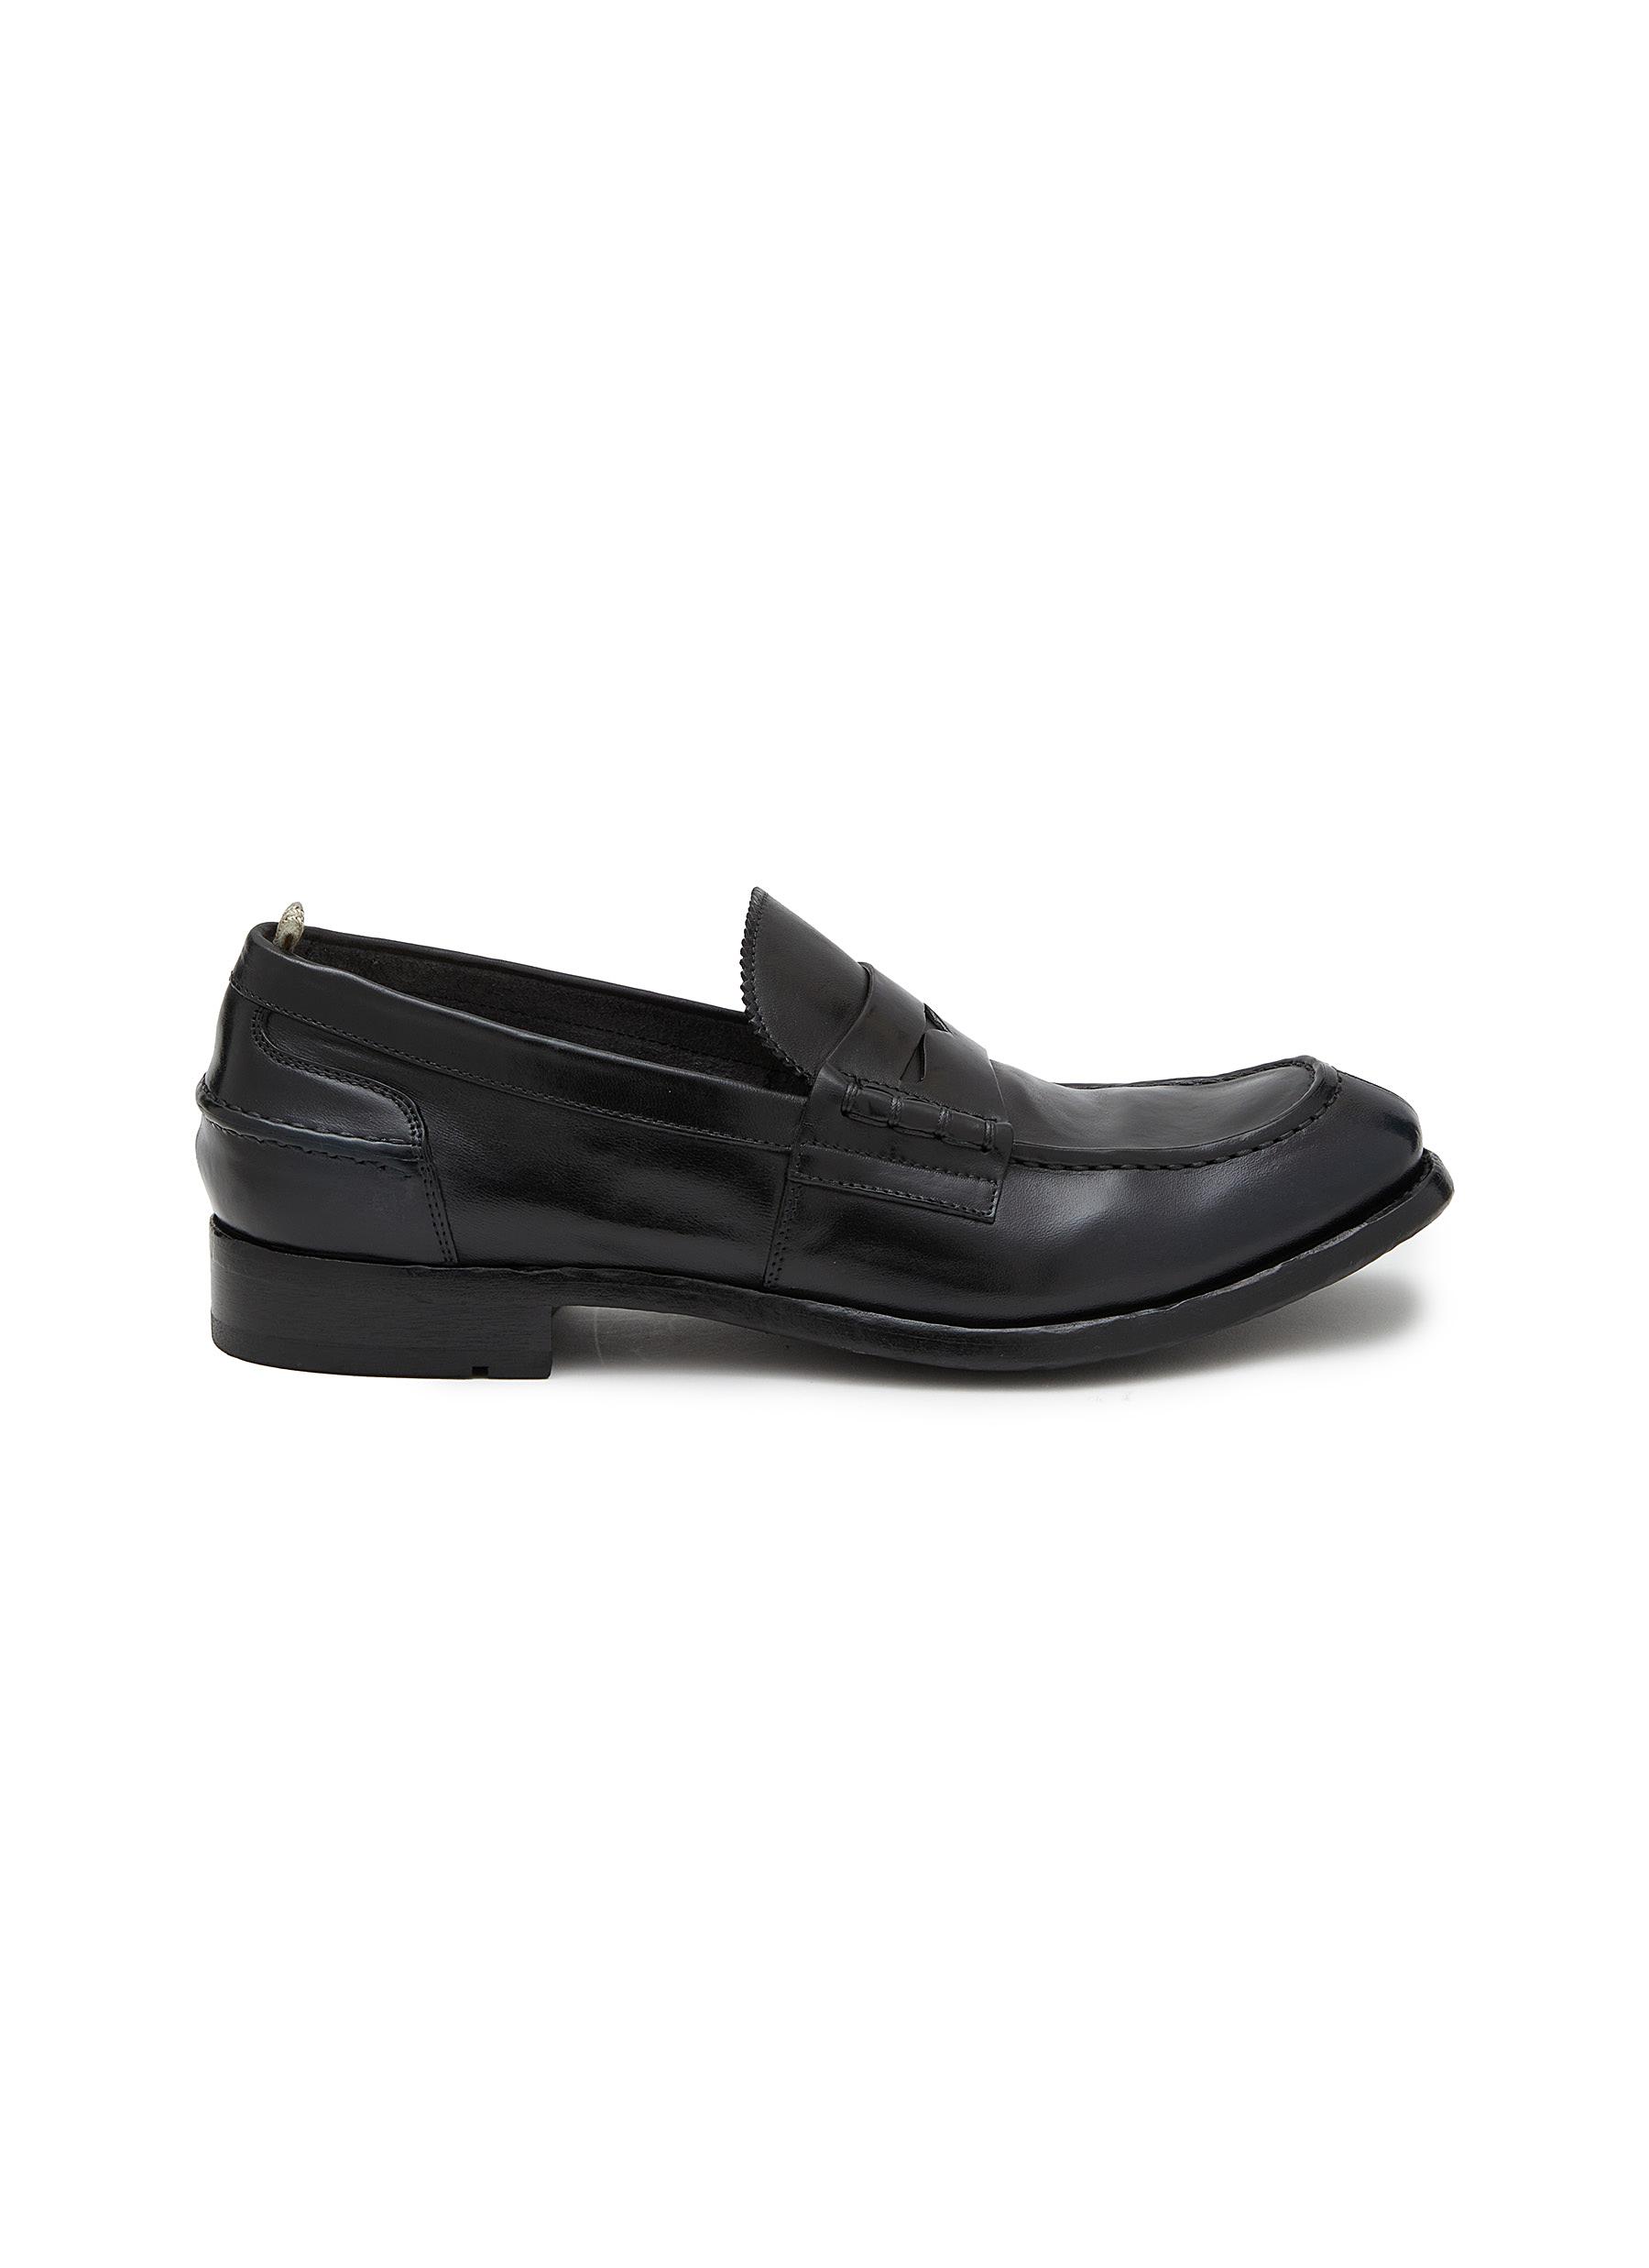 Balance 017 Leather Penny Loafers